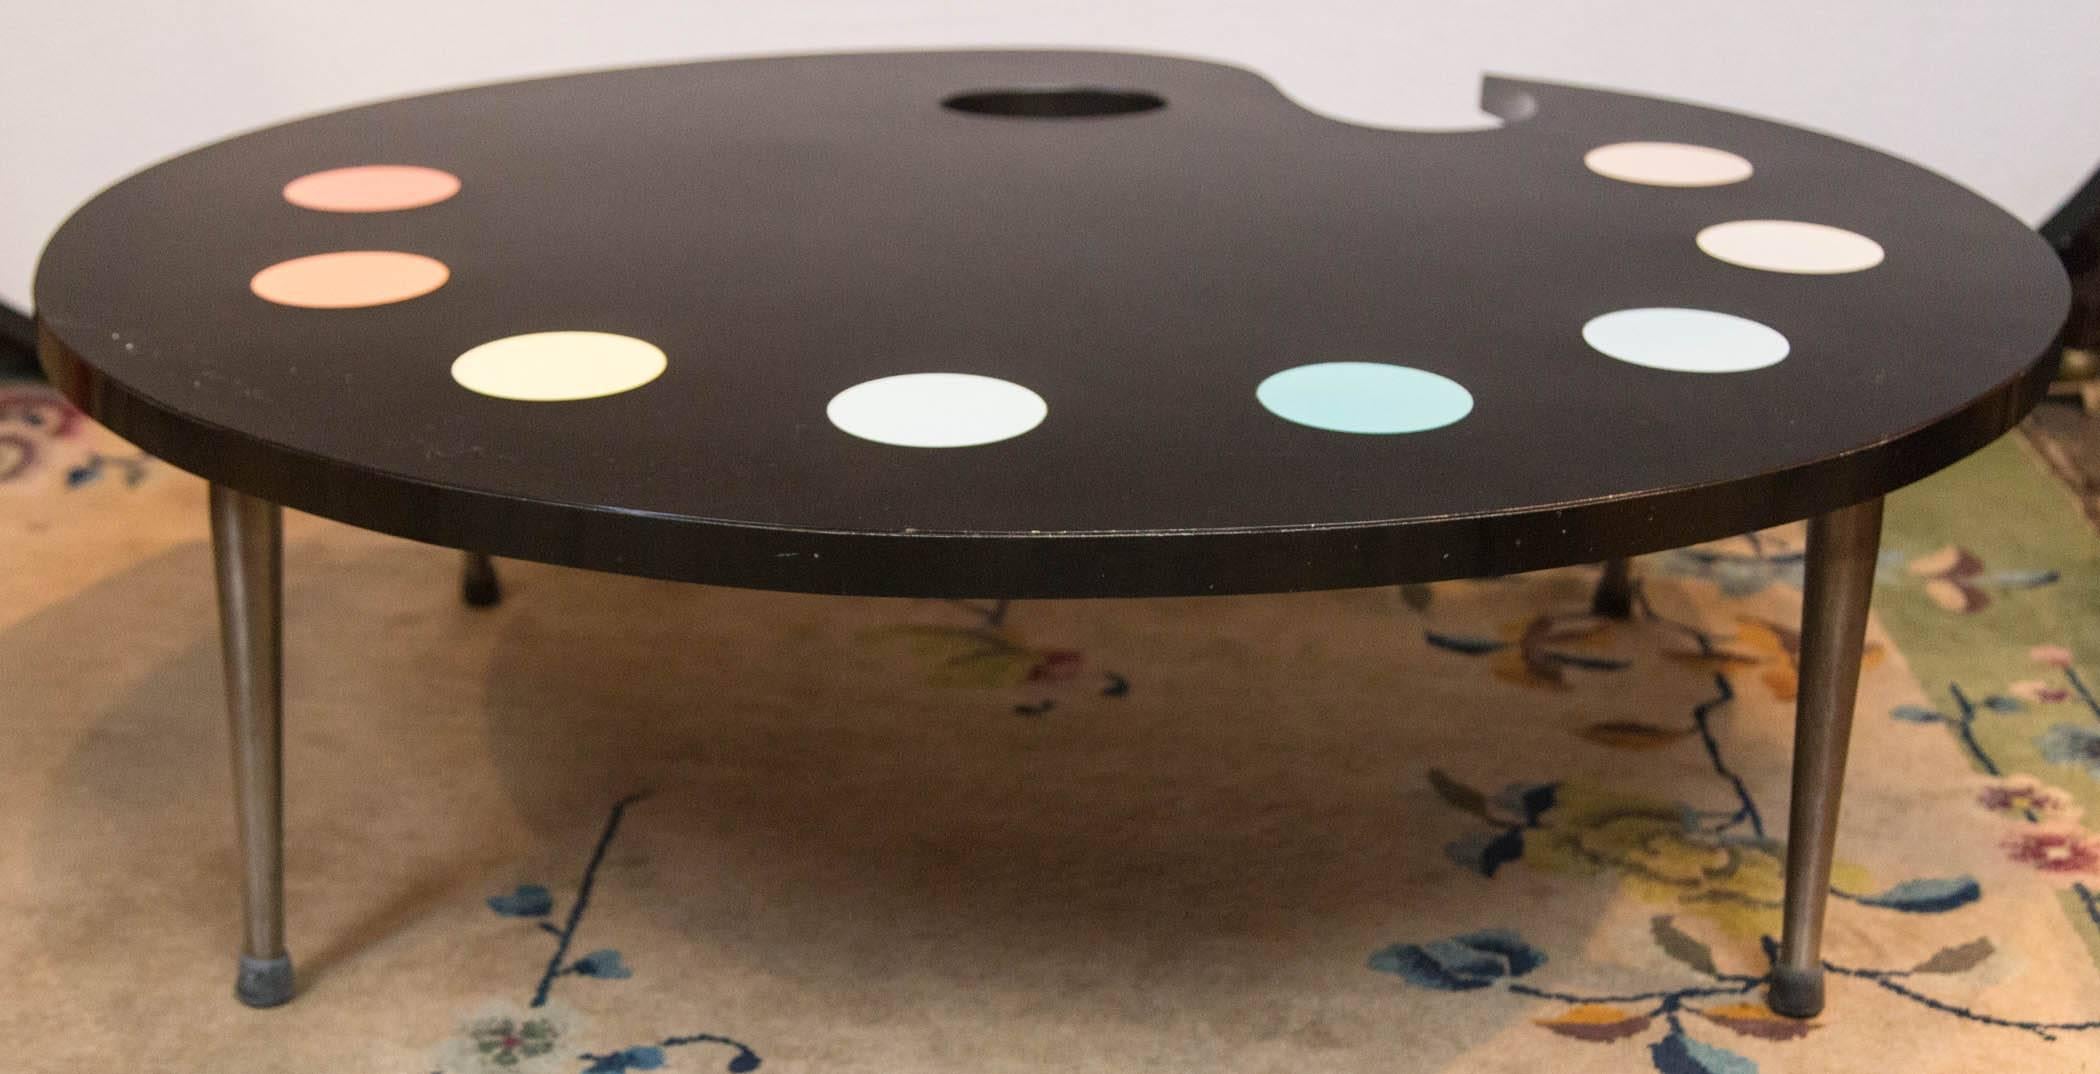 Fabulous 1950s whimsical painter's palette coffee table. The top is laminate. The legs are metal.